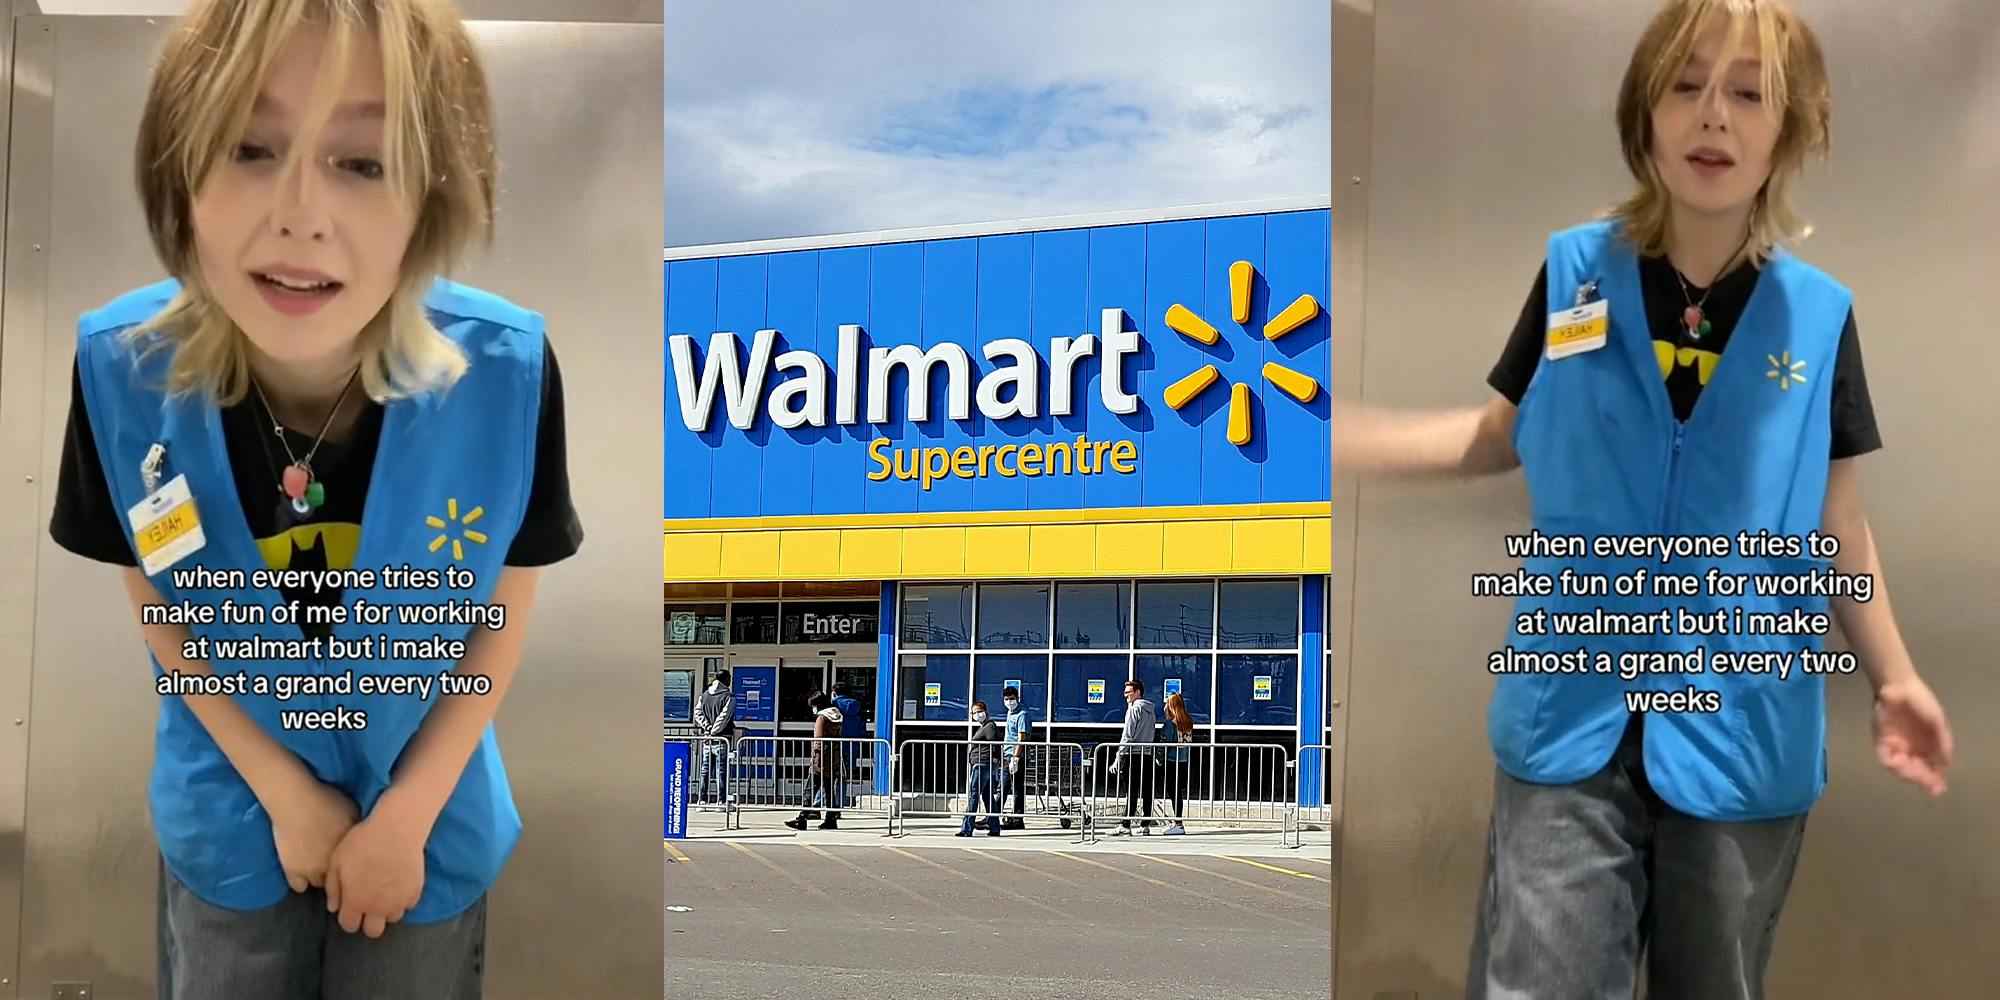 Walmart worker says they’re tired of being made fun of for working at Walmart.